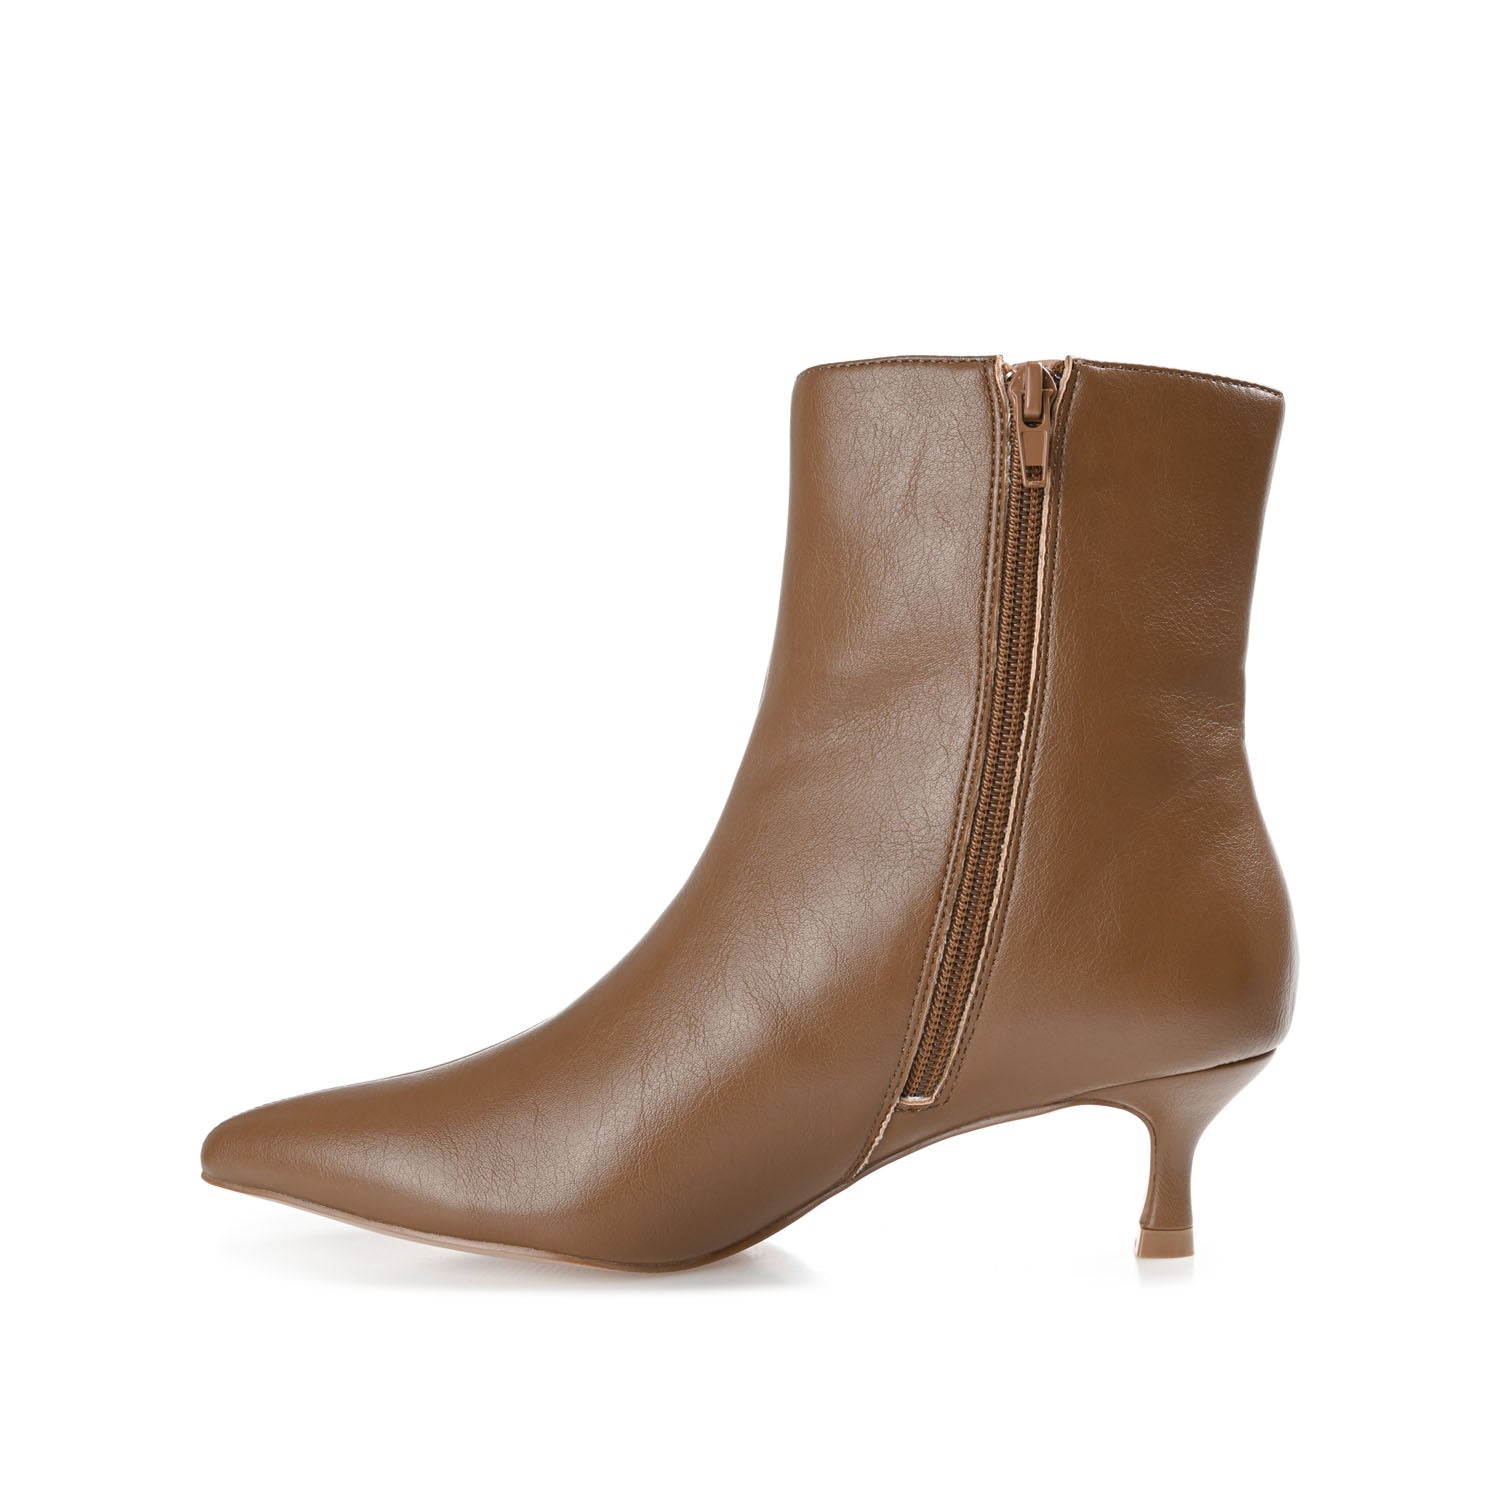 ARELY POINTED TOE BOOTIE IN WIDE